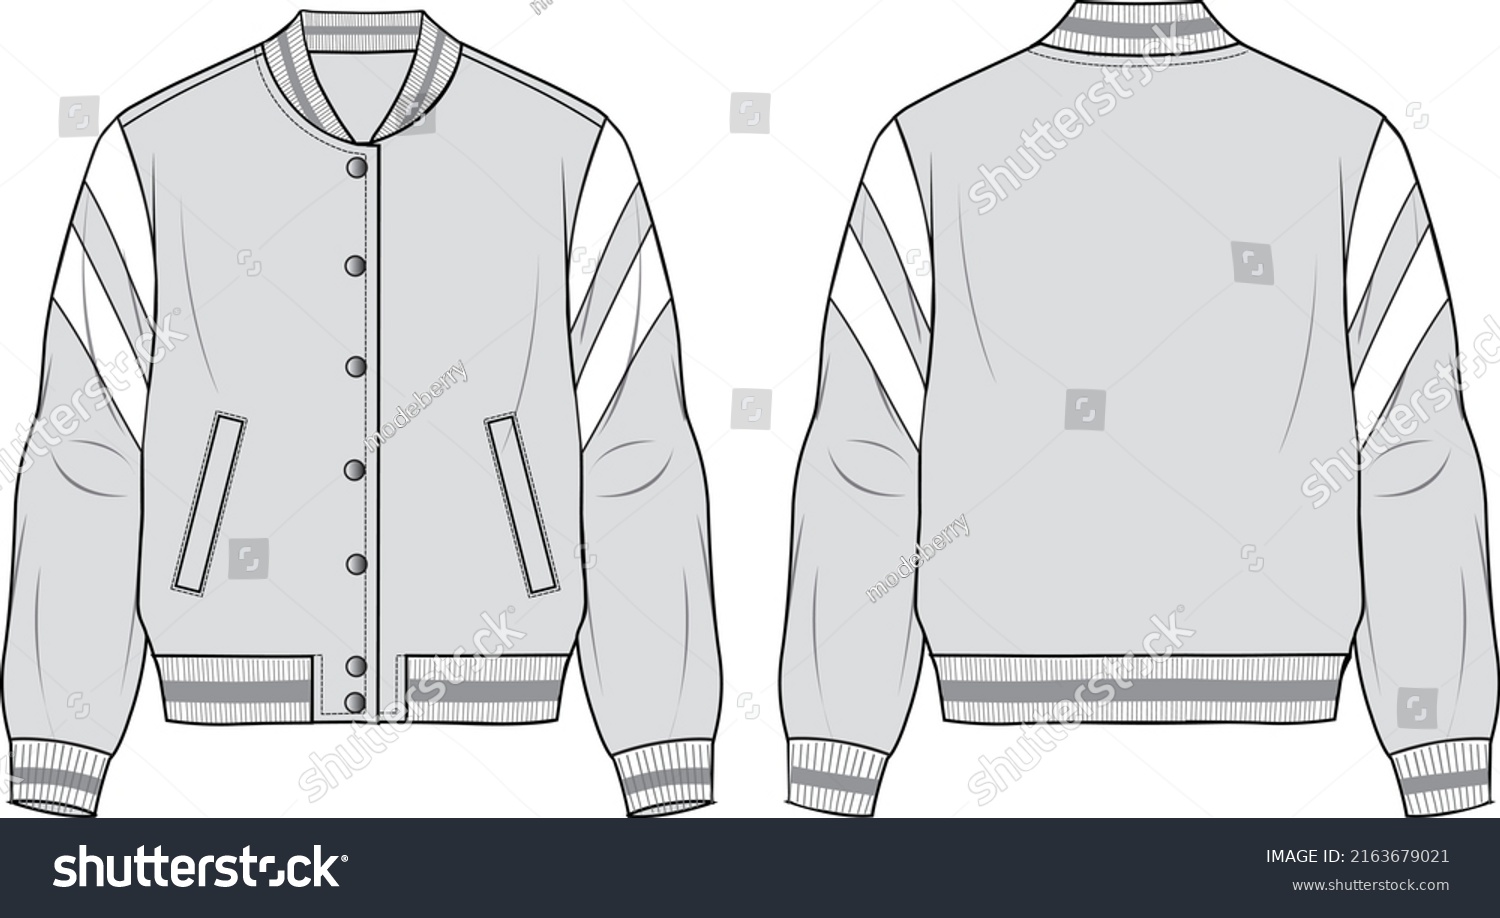 Womens Zipup Trimmed Bomber Jacket Set Stock Vector (Royalty Free ...